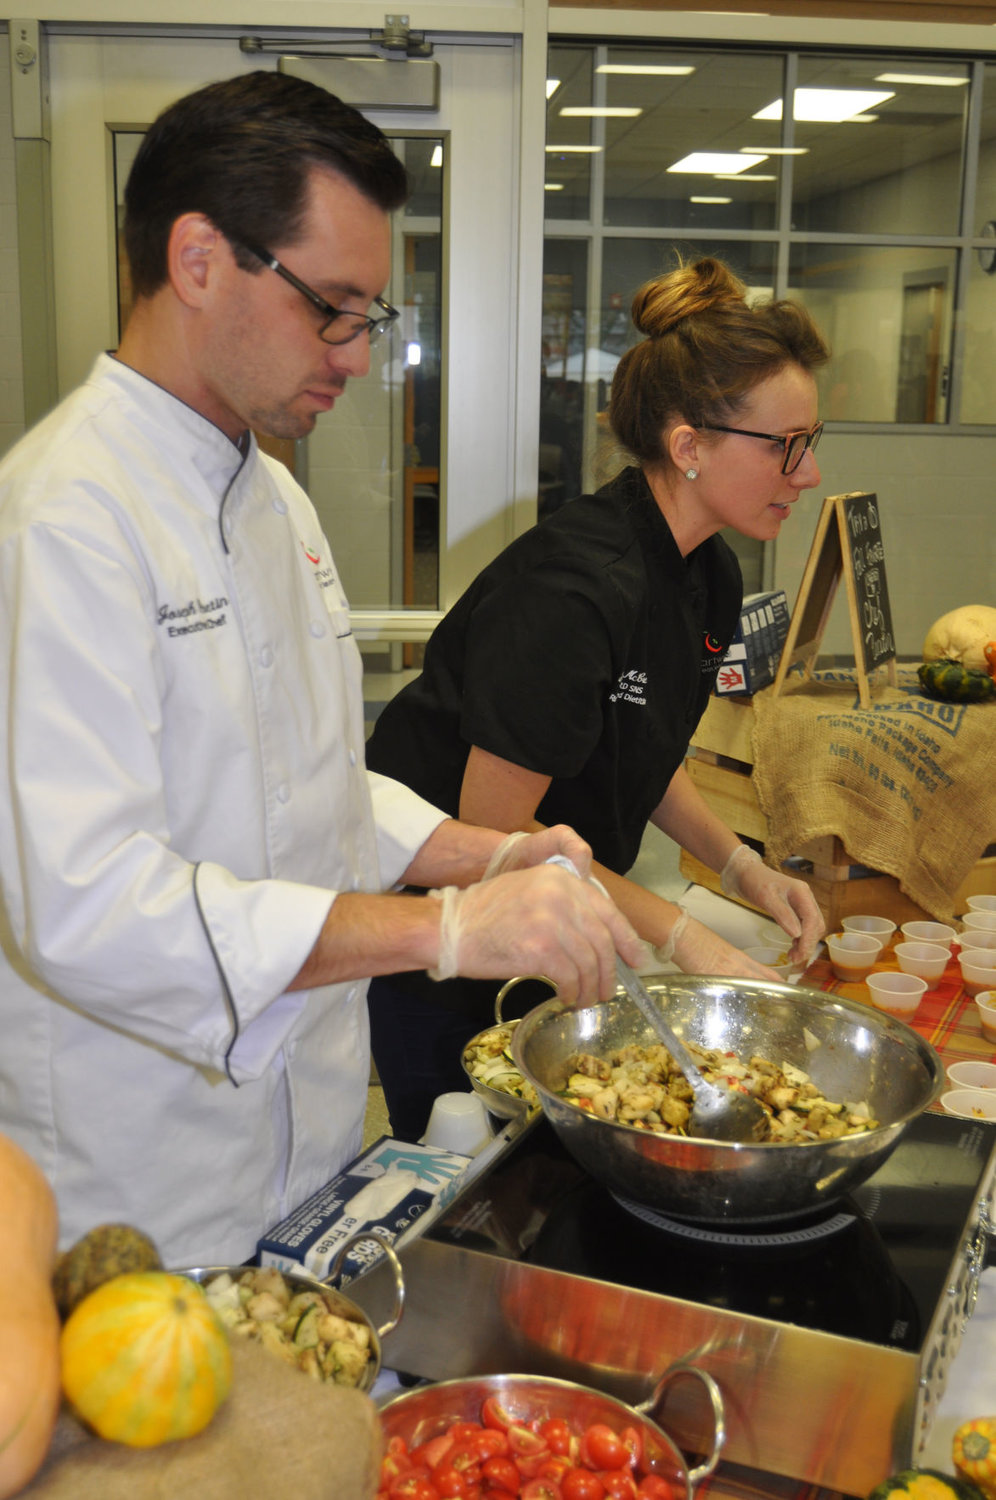 Chartwells chef Joseph Peretin stirs Ratatouille as resident dietician Tarrah McCreary speaks to students Friday during the Farm to School event at Crawfordsville Middle School.